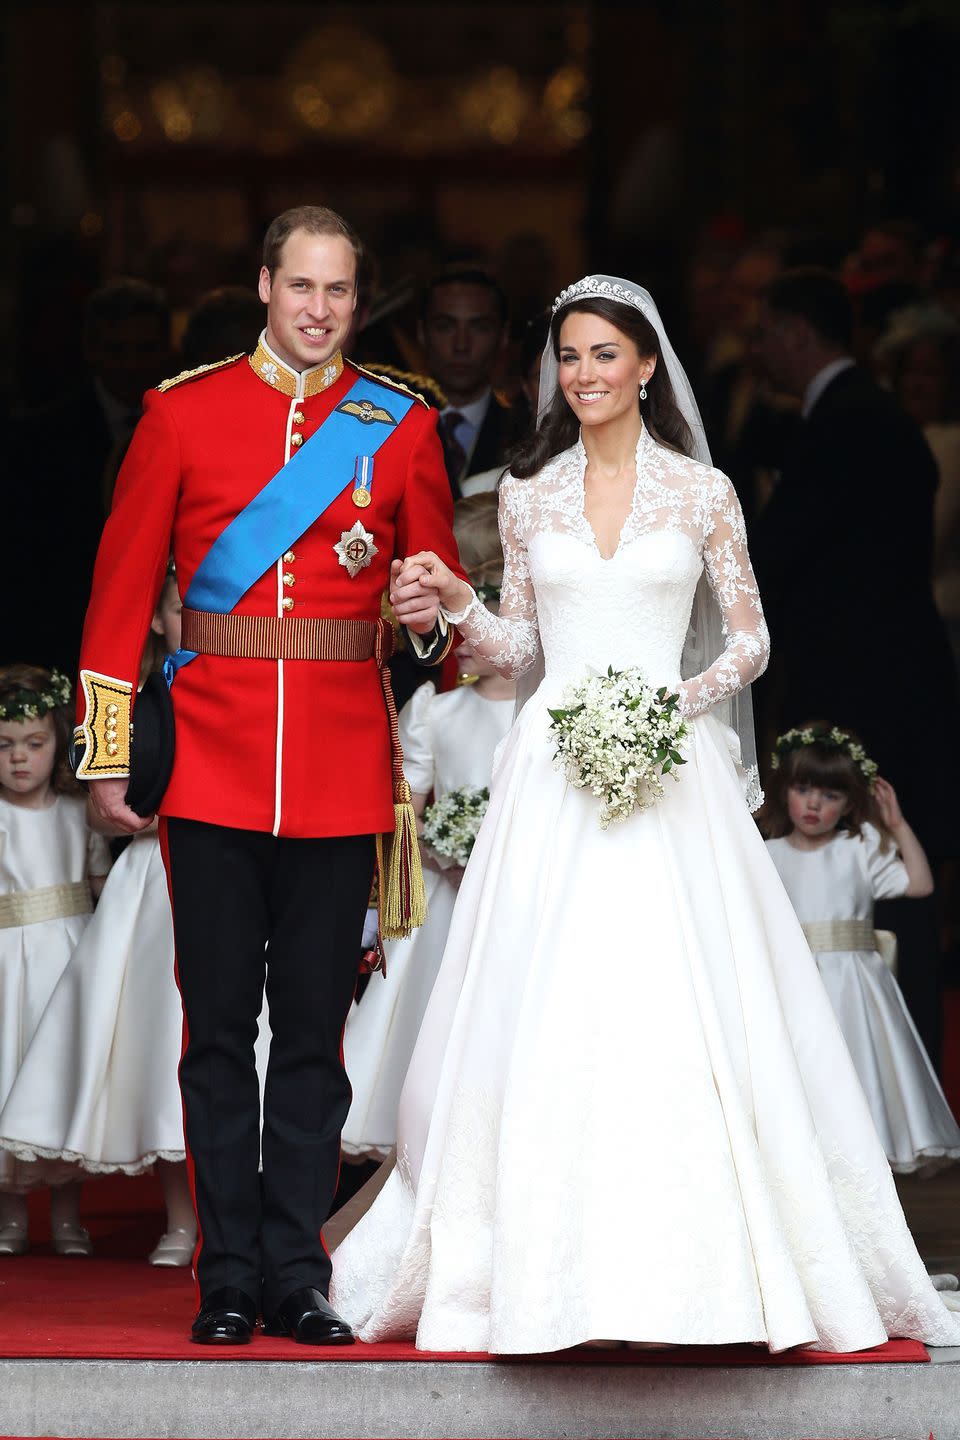 Prince William and Kate Middleton, Duchess of Cambridge on their wedding day